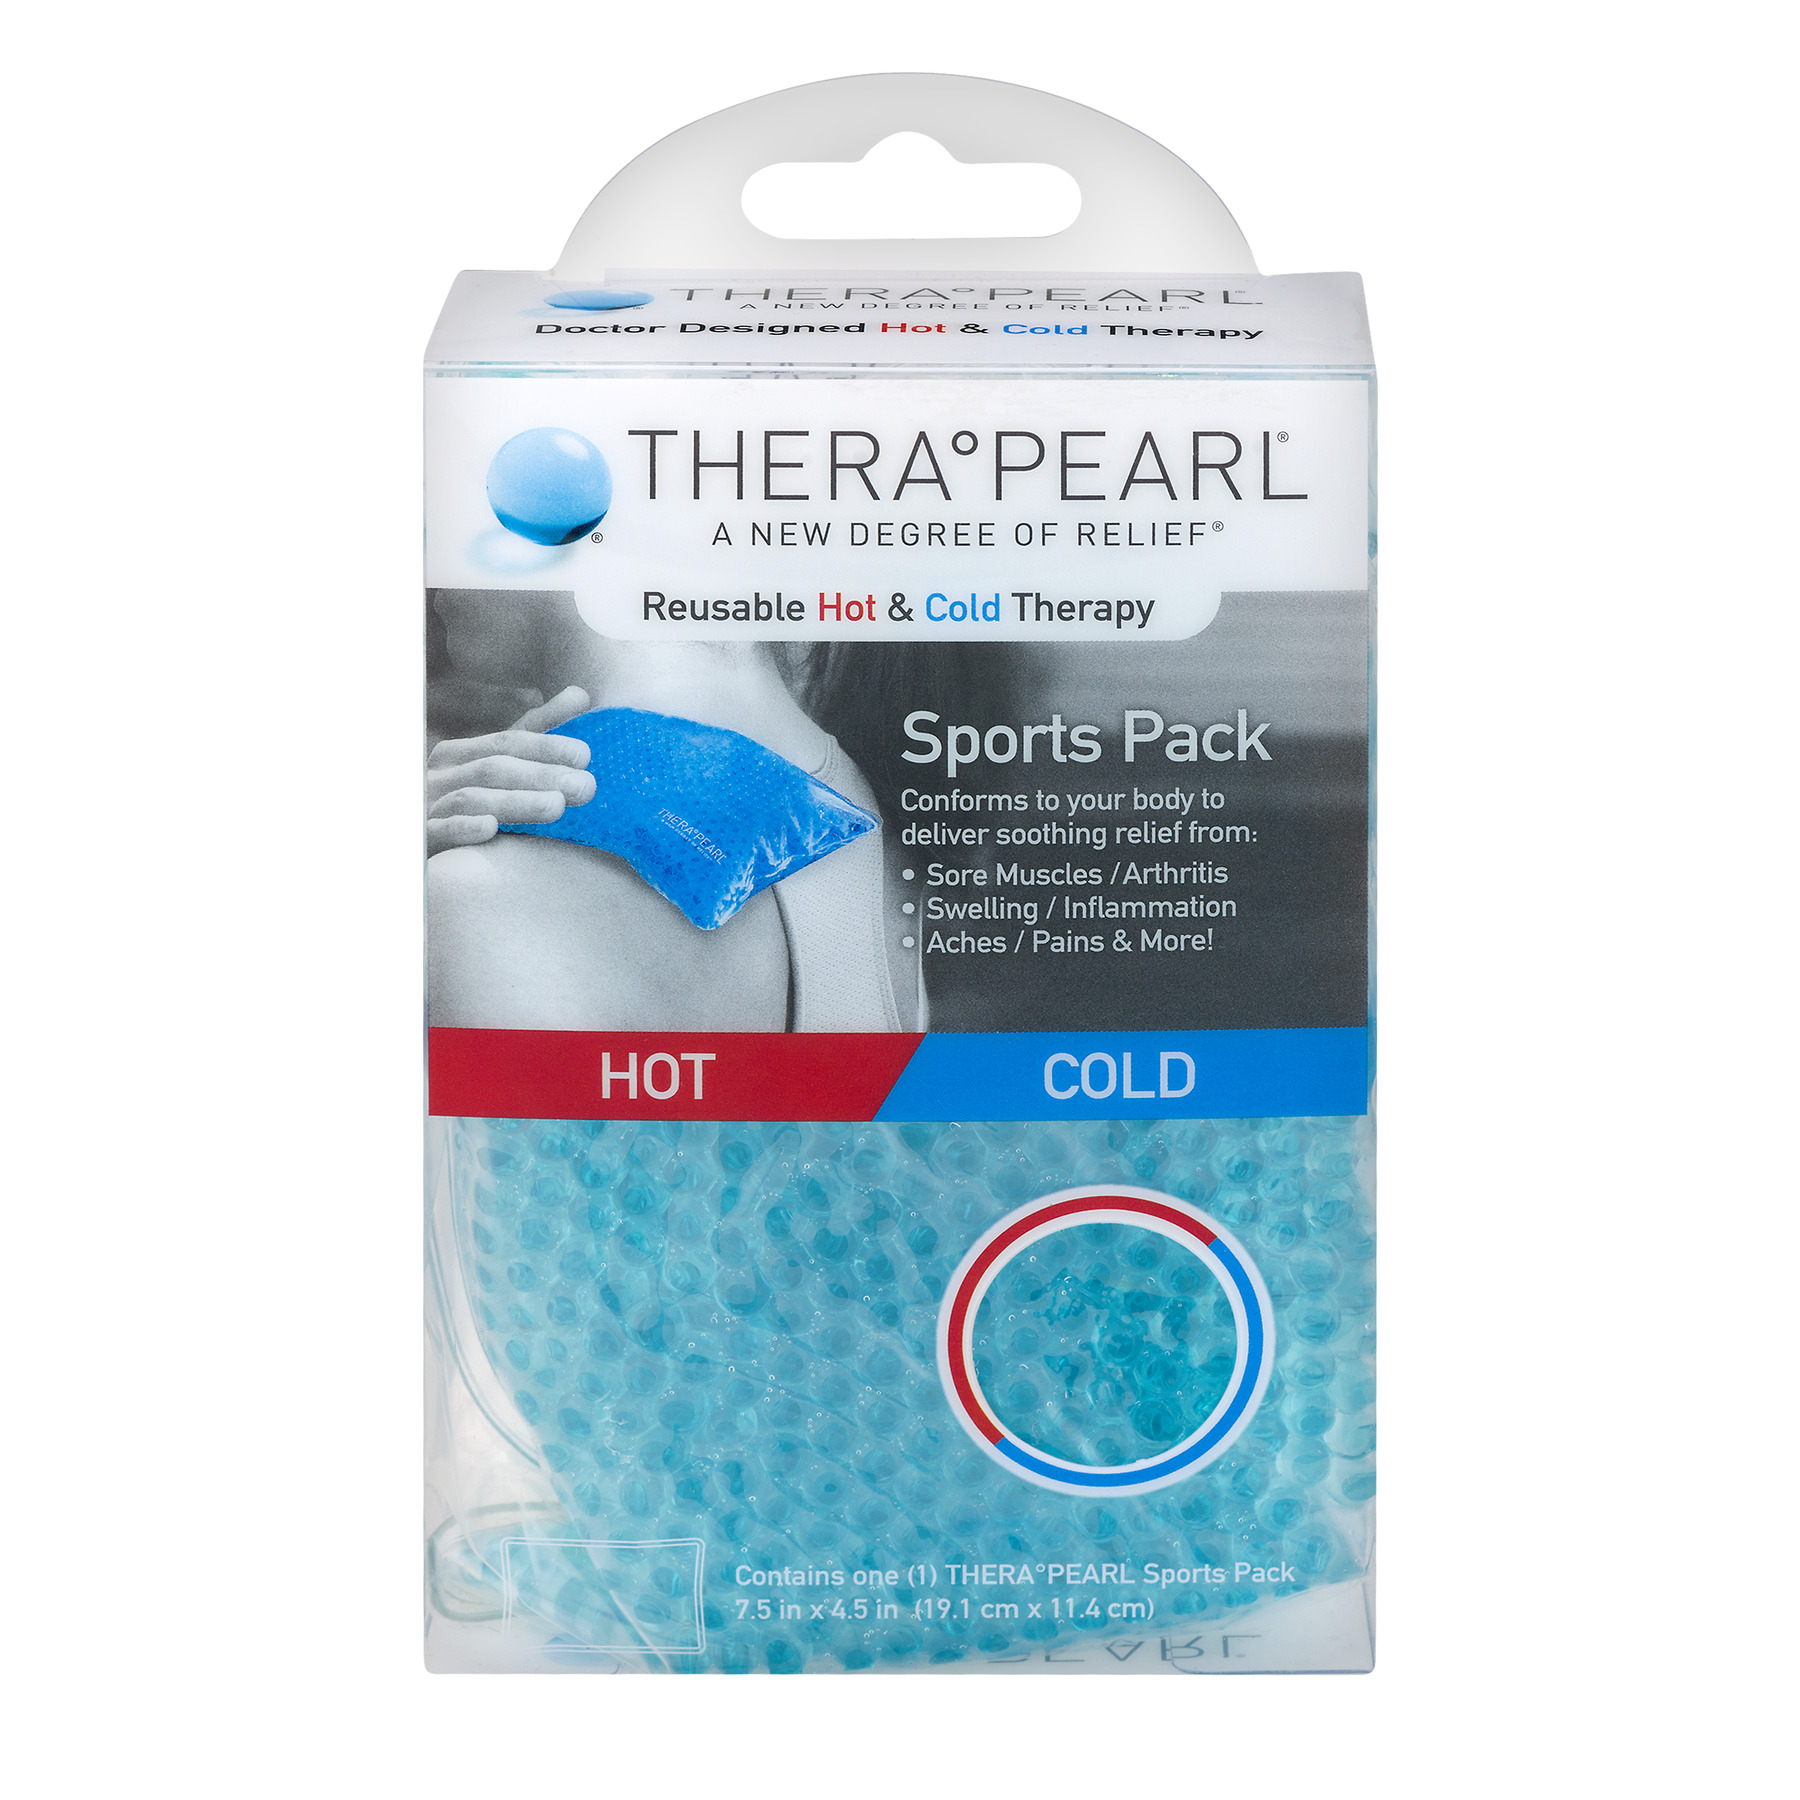 TheraPearl Sports Pack Reusable Hot & Cold Therapy, 1.0 CT - Walmart.com